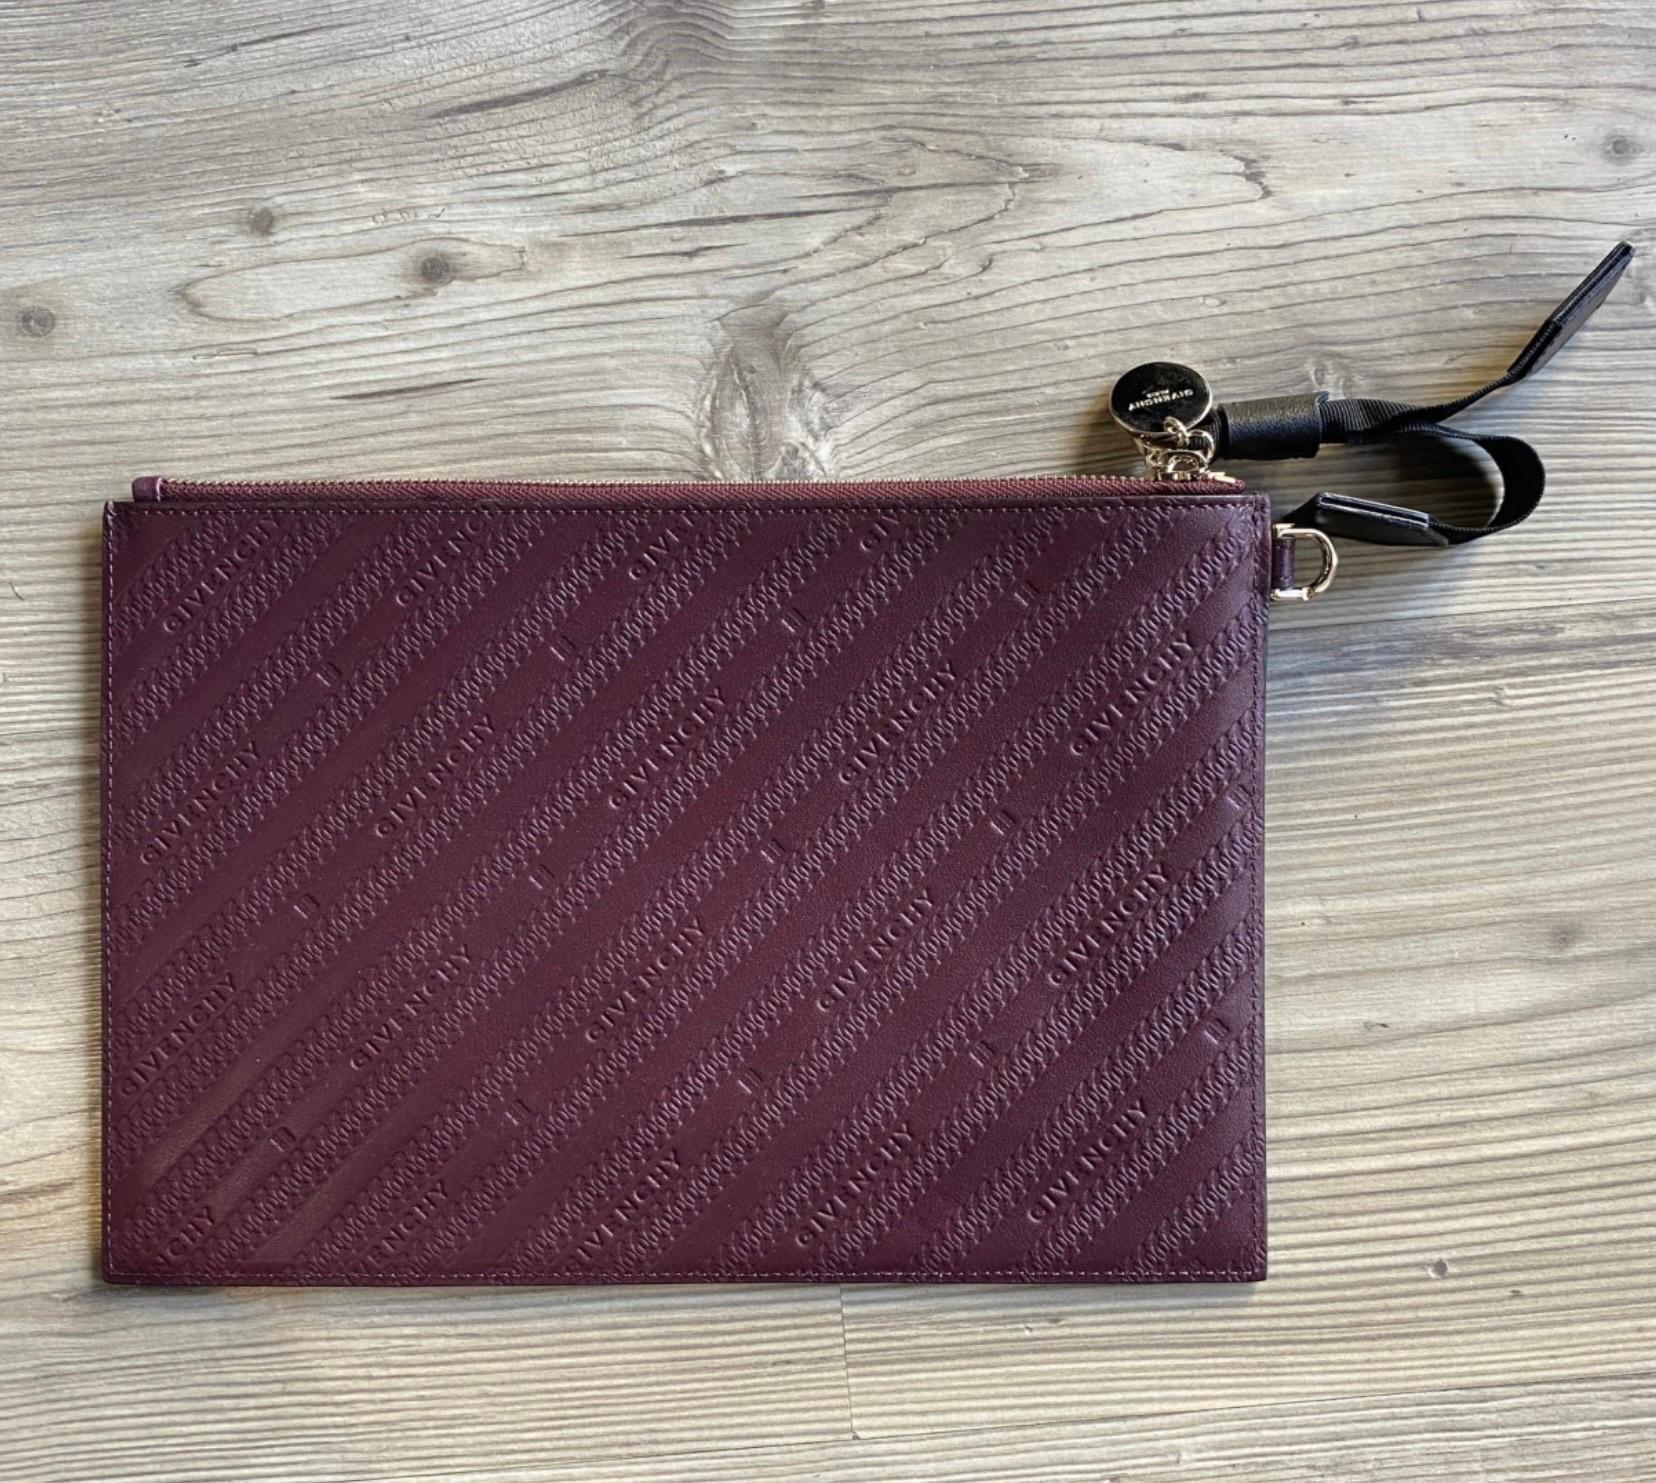 Givenchy clutch bag. In burgundy leather and gold hardware. 
measurements: 
height 20 cm
length 29 cm
excellent general condition, never used